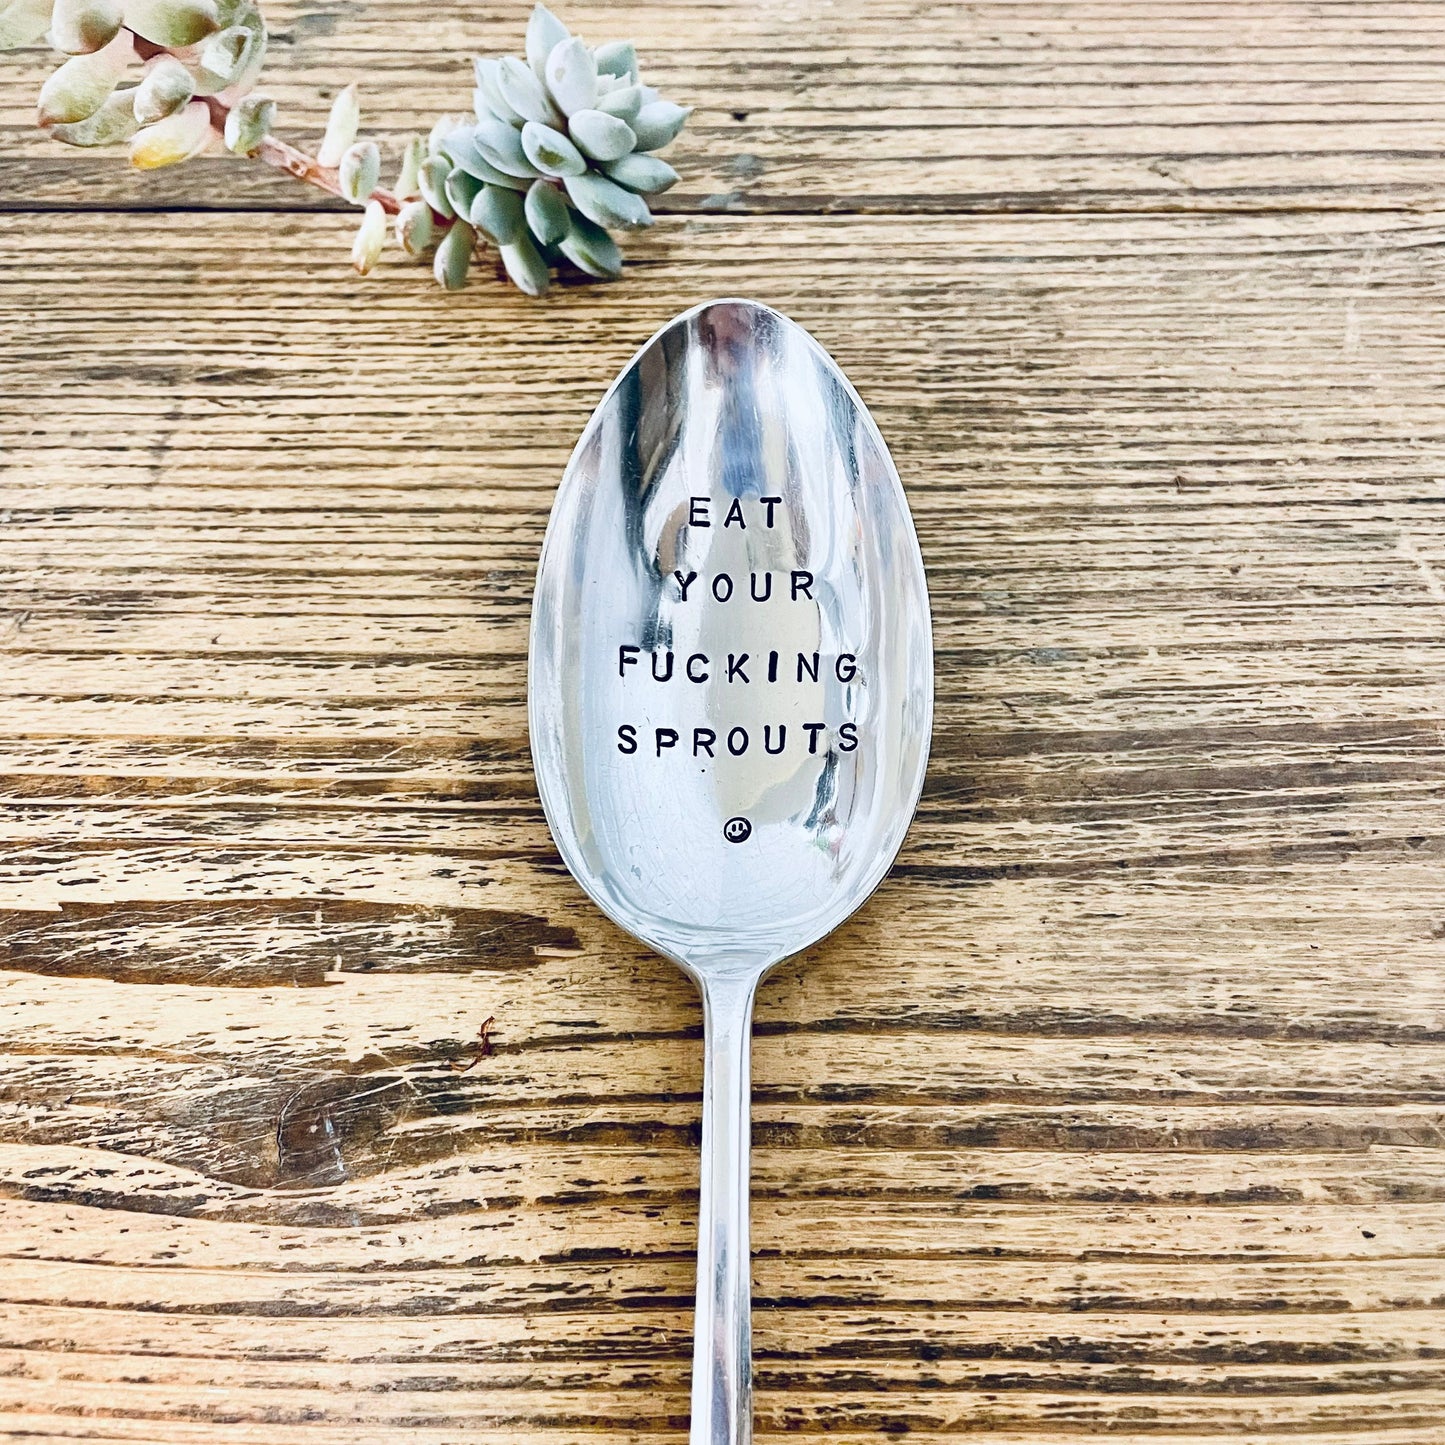 Eat Your Fucking Sprouts - Vintage Serving Spoon